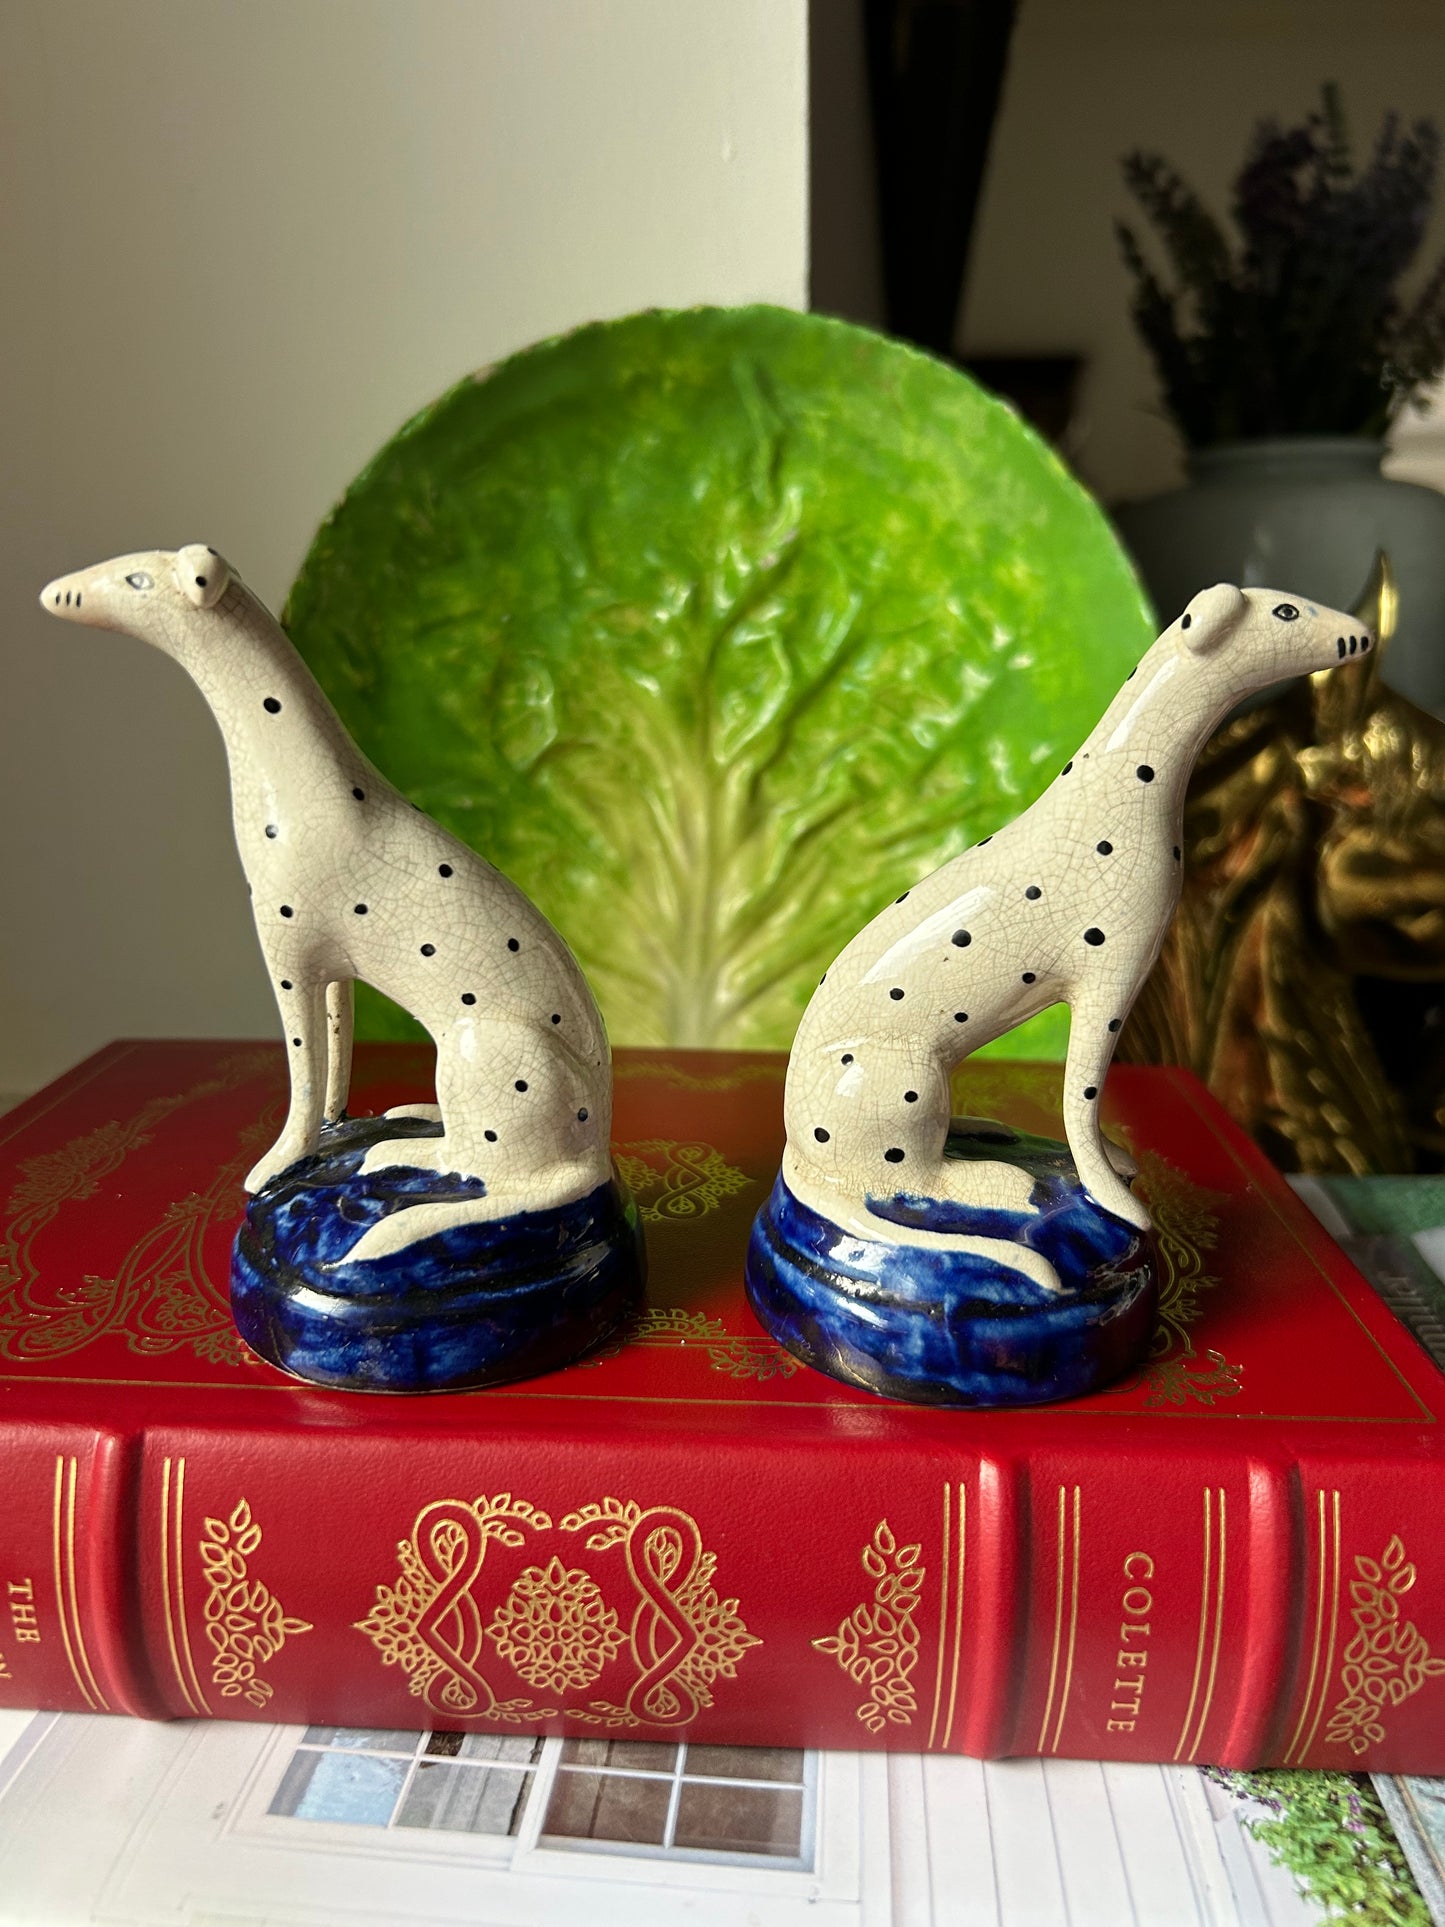 Small Pair of Antique Staffordshire Dalmatians on a Cobalt Base C.1860